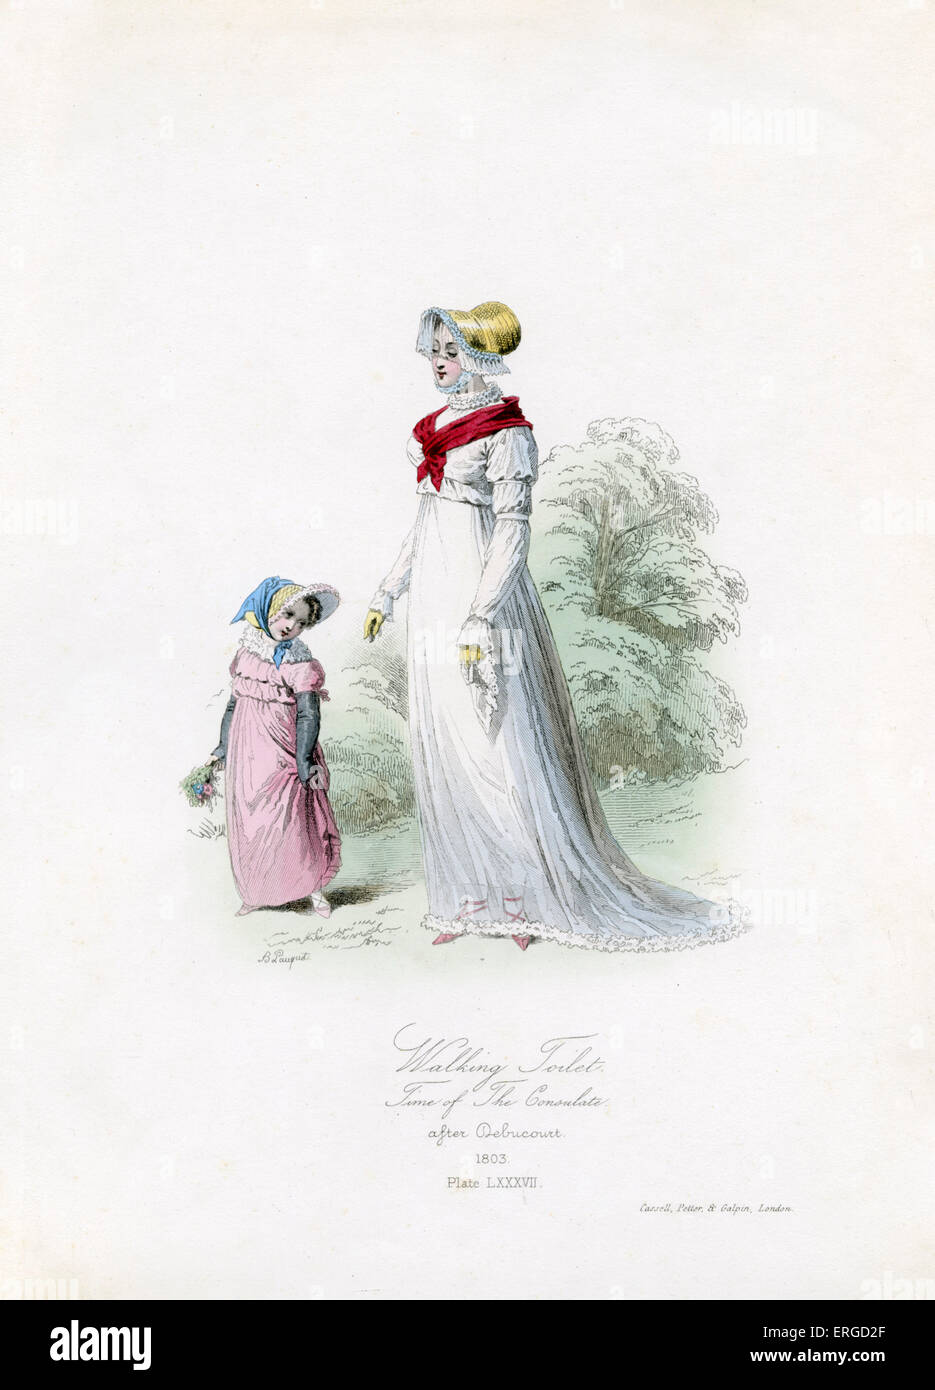 Walking clothes in the time of the Consulate, 1803 - from engraving by Hippolyte Pauquet after Debucourt. The Consulate Stock Photo